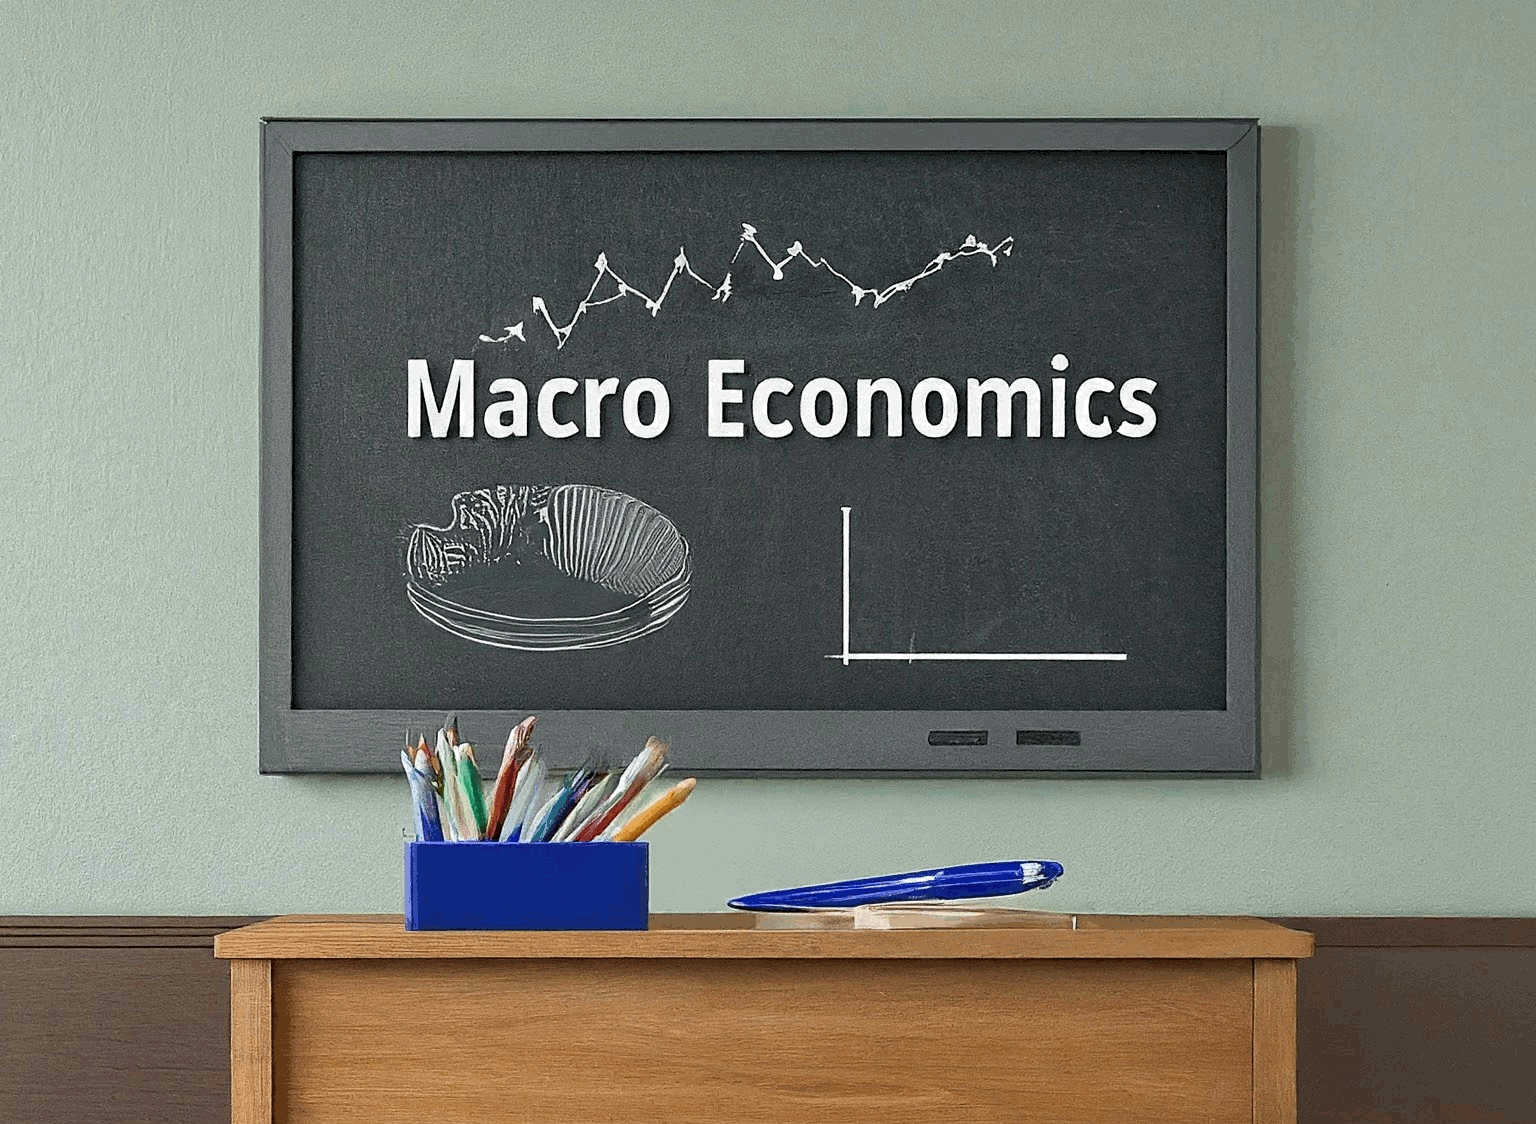 Plus Two Economics-Chapter-11: Multi Choice Questions and Answers in English